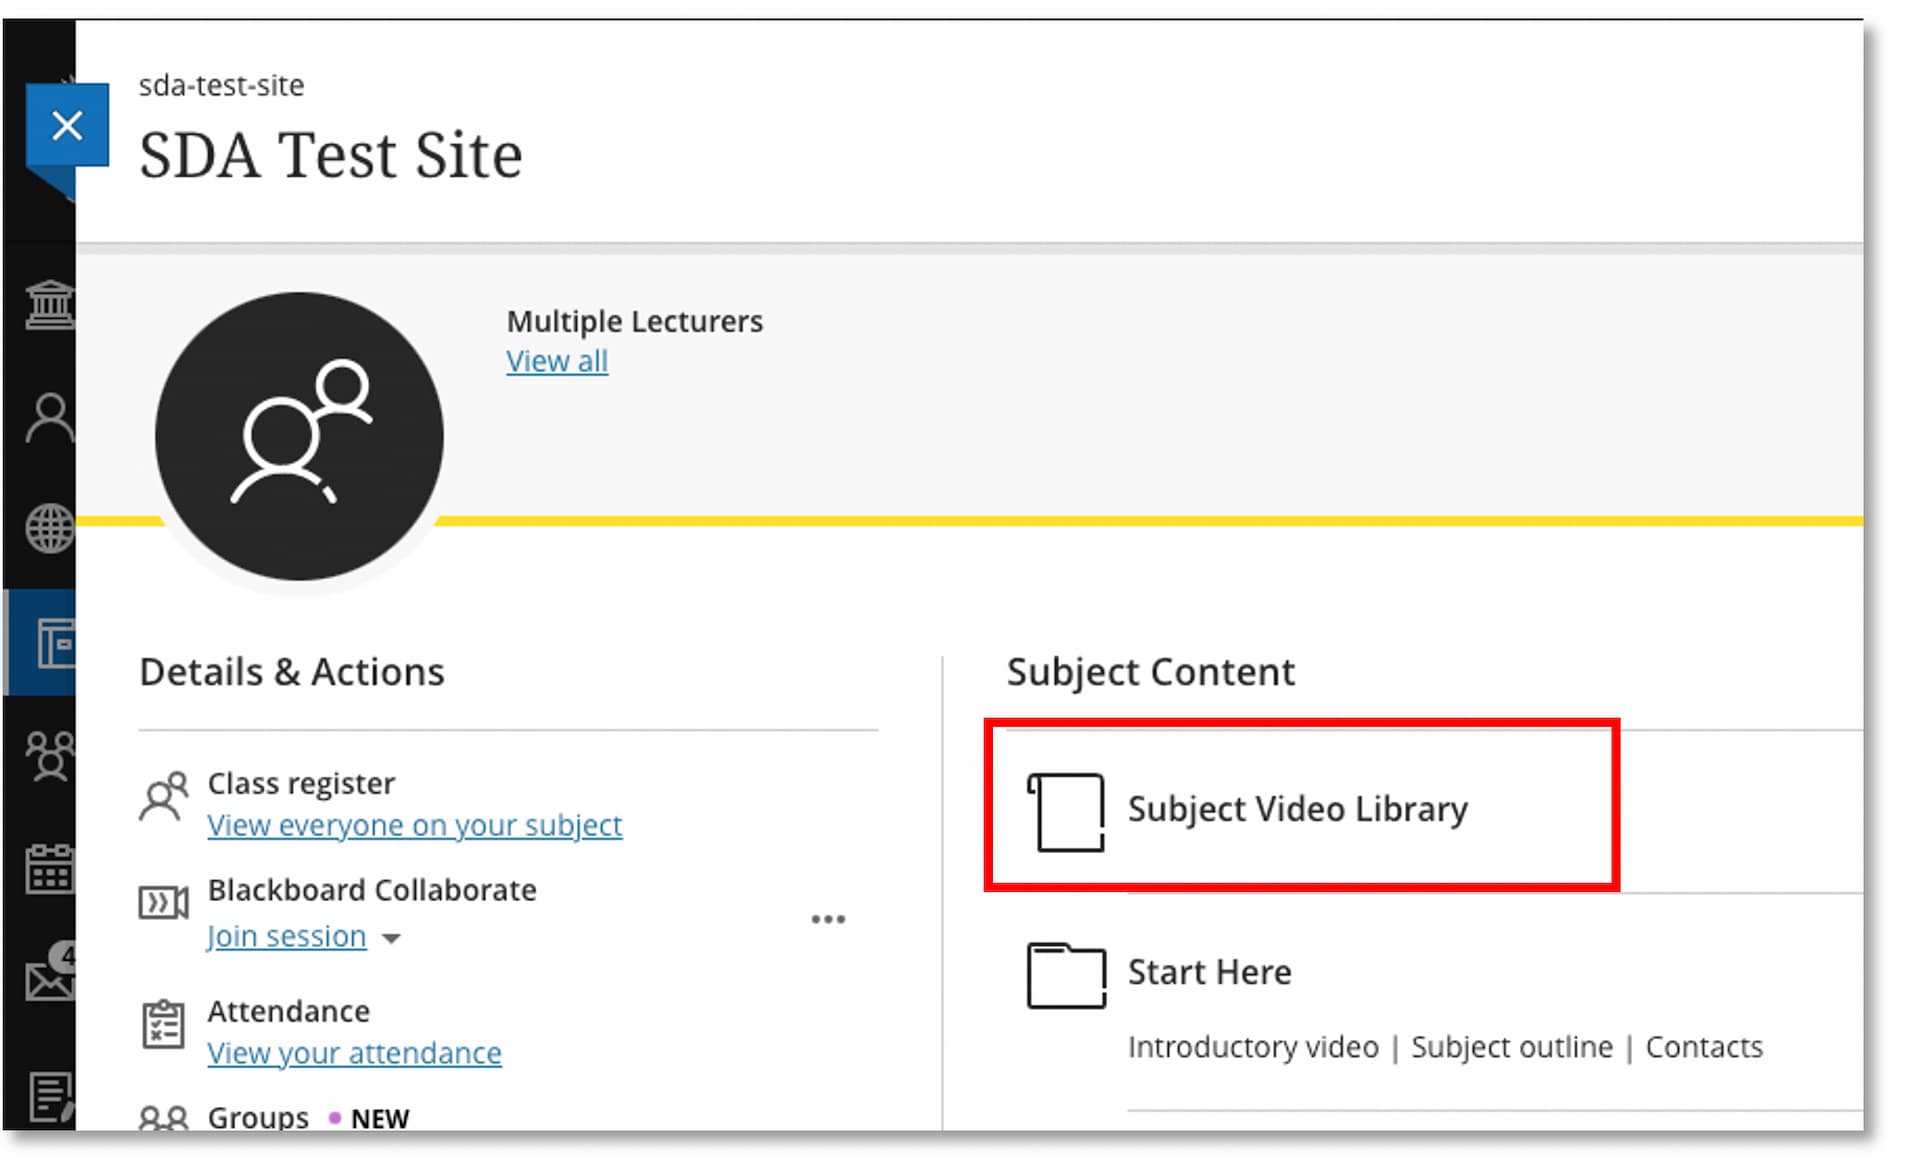 Screenshots - Accessing the Subject Video Library from the Subject Content (if lecturer has made it available)